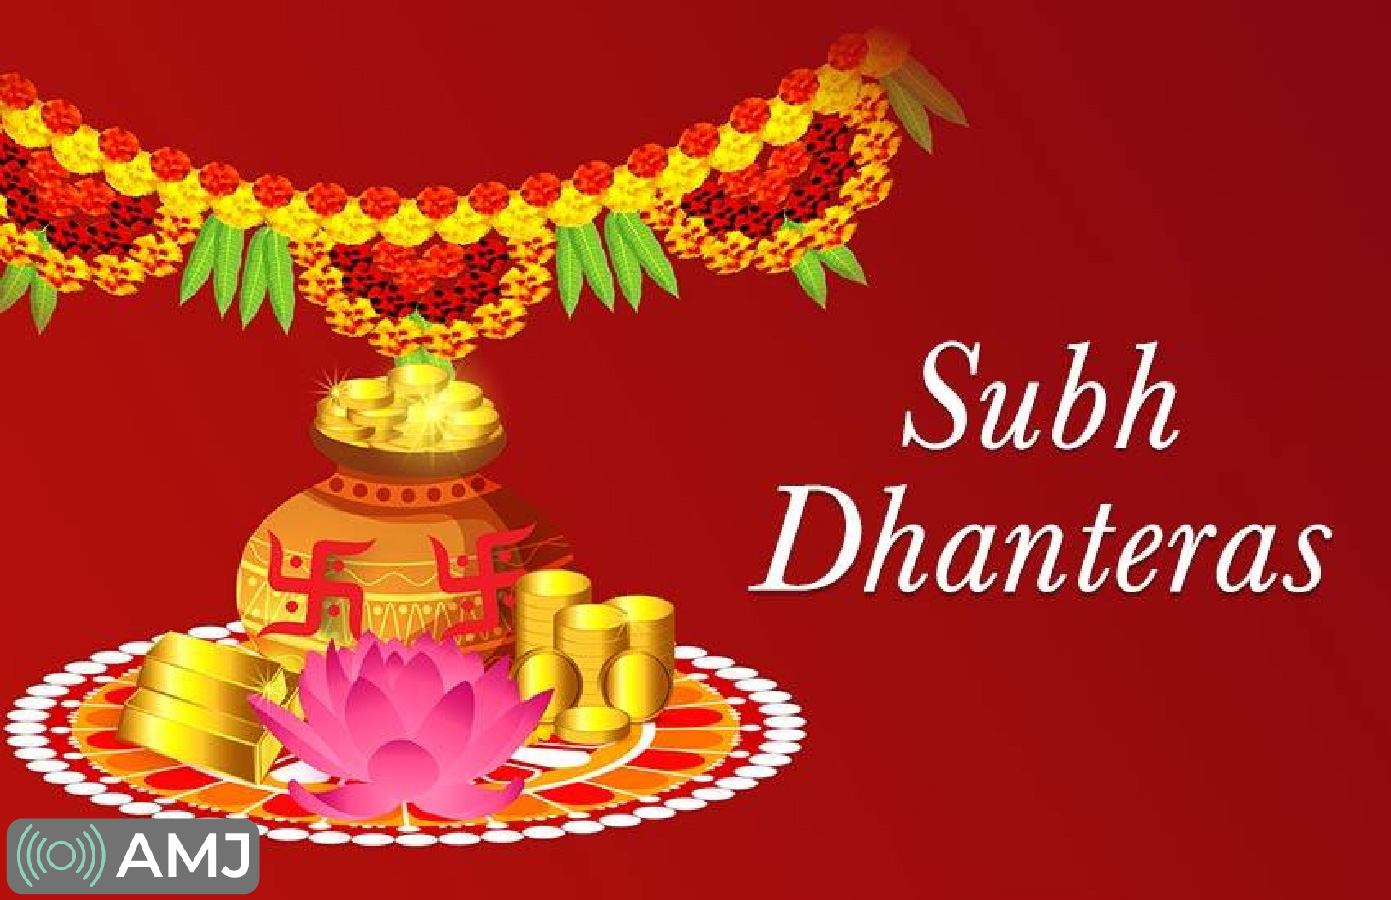 Subh Dhanteras Images